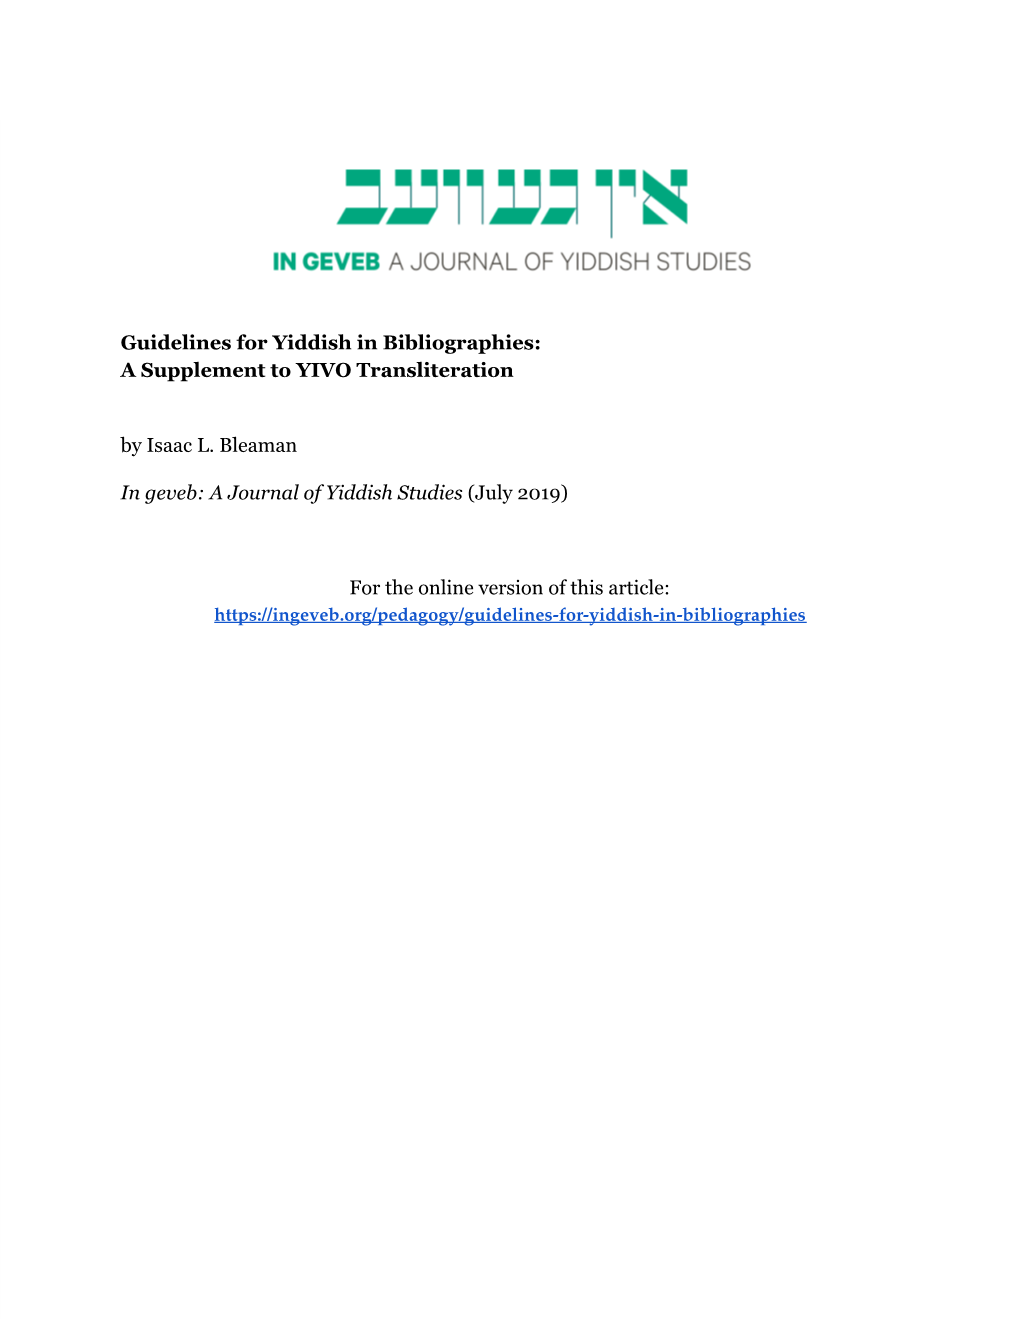 Guidelines for Yiddish in Bibliographies: a Supplement to YIVO Transliteration